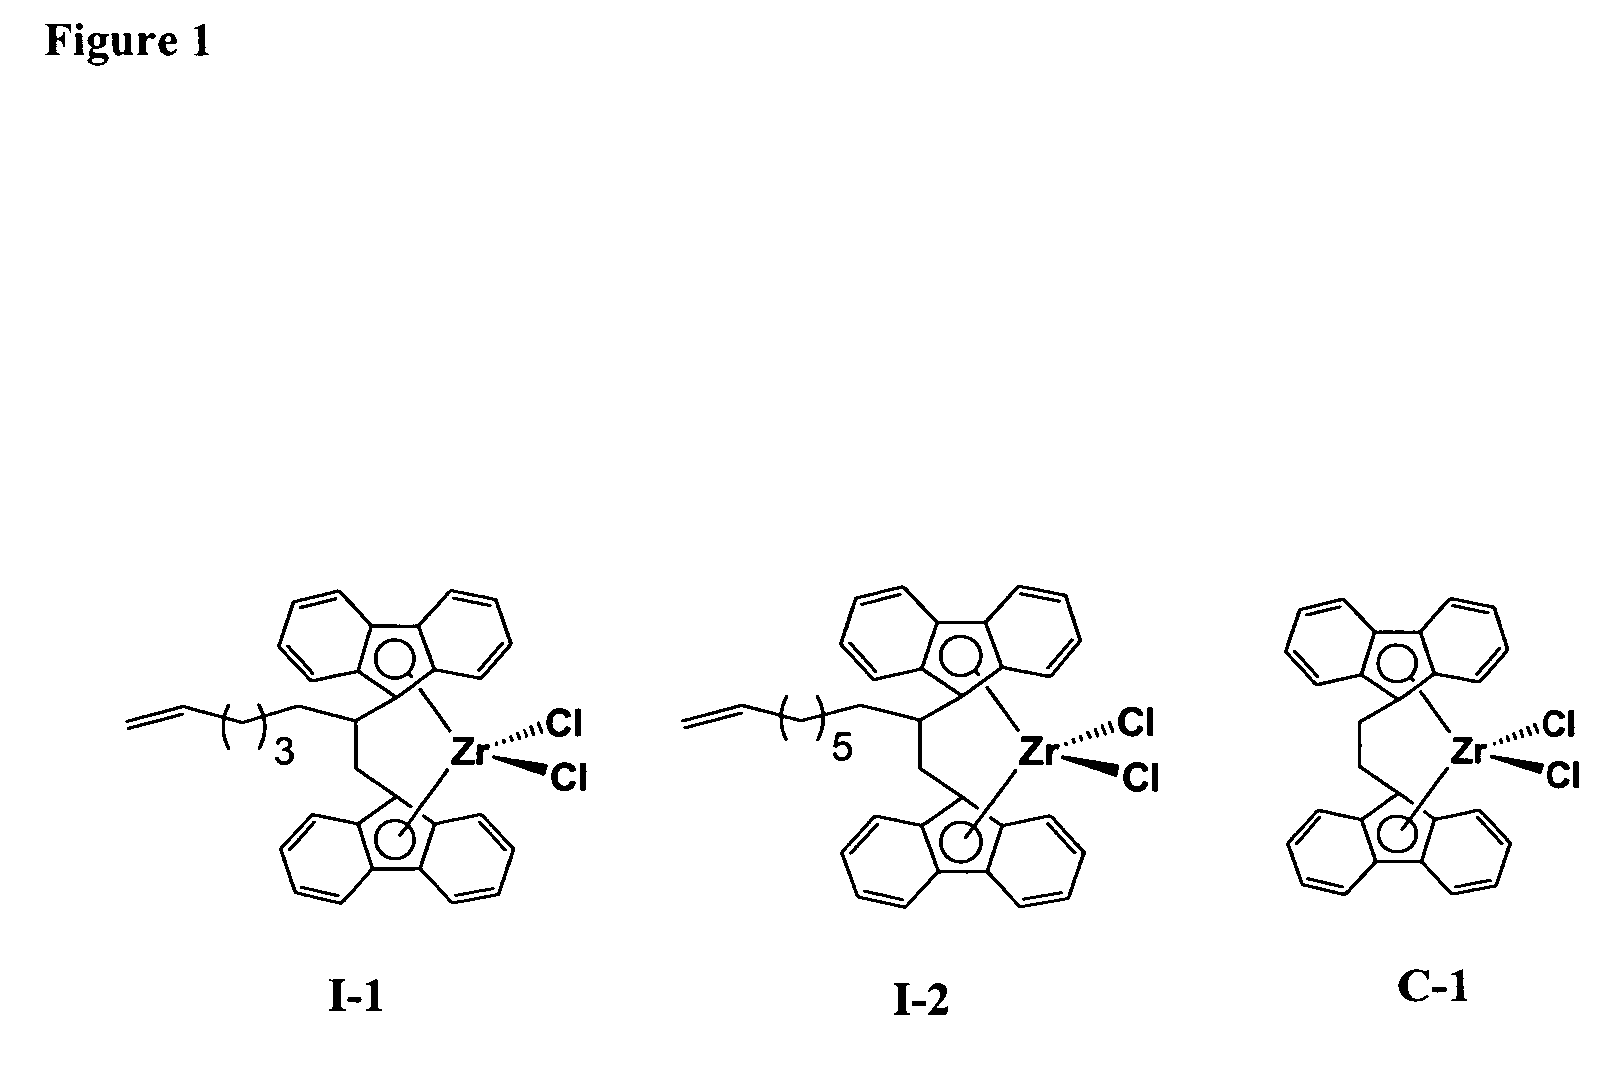 Polymerization catalysts for producing polymers with low levels of long chain branching